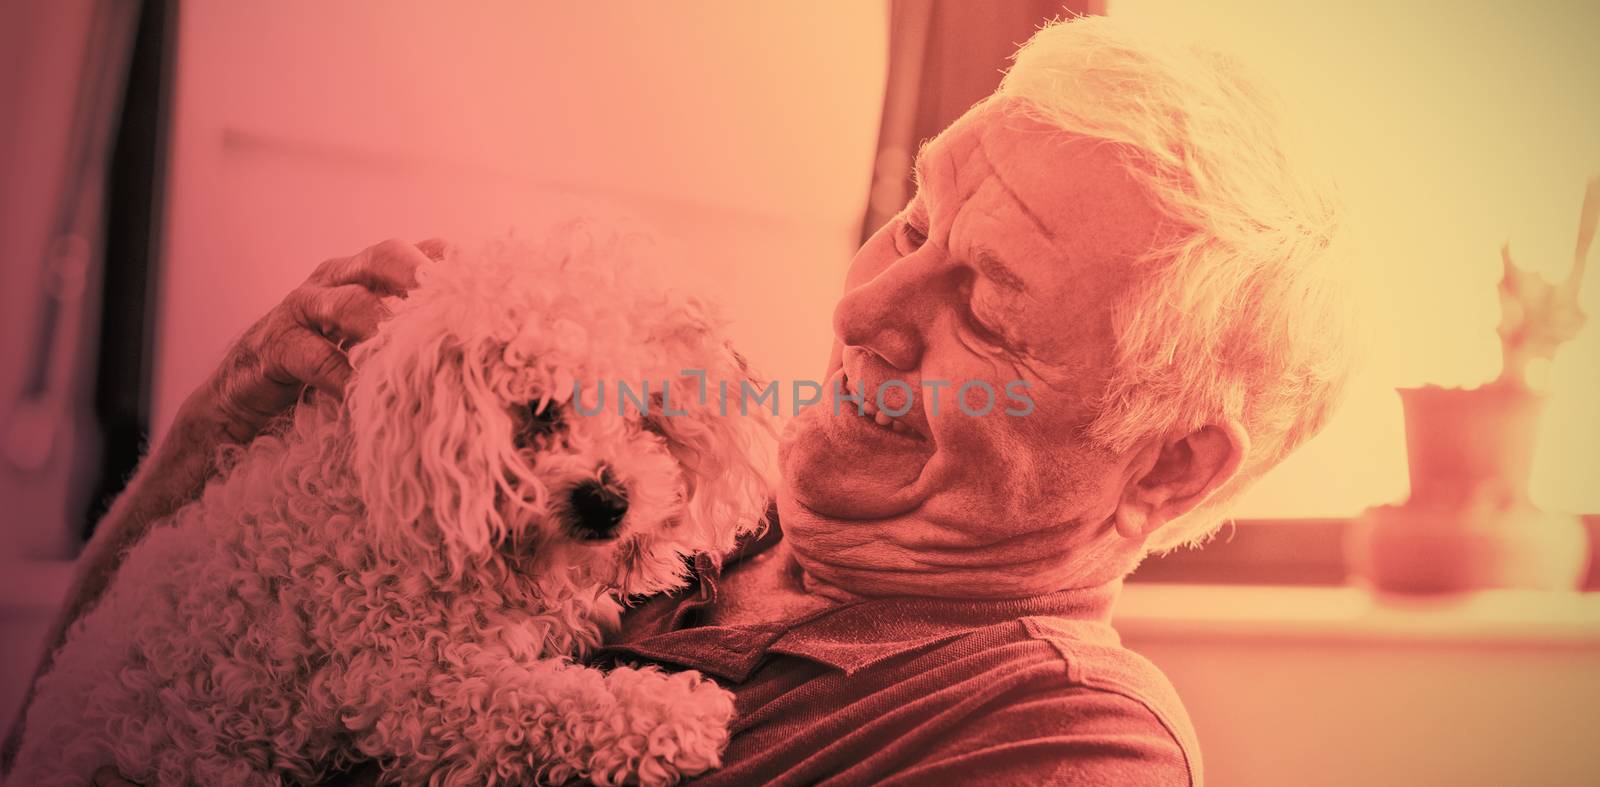 Senior man holding a dog in a retirement home